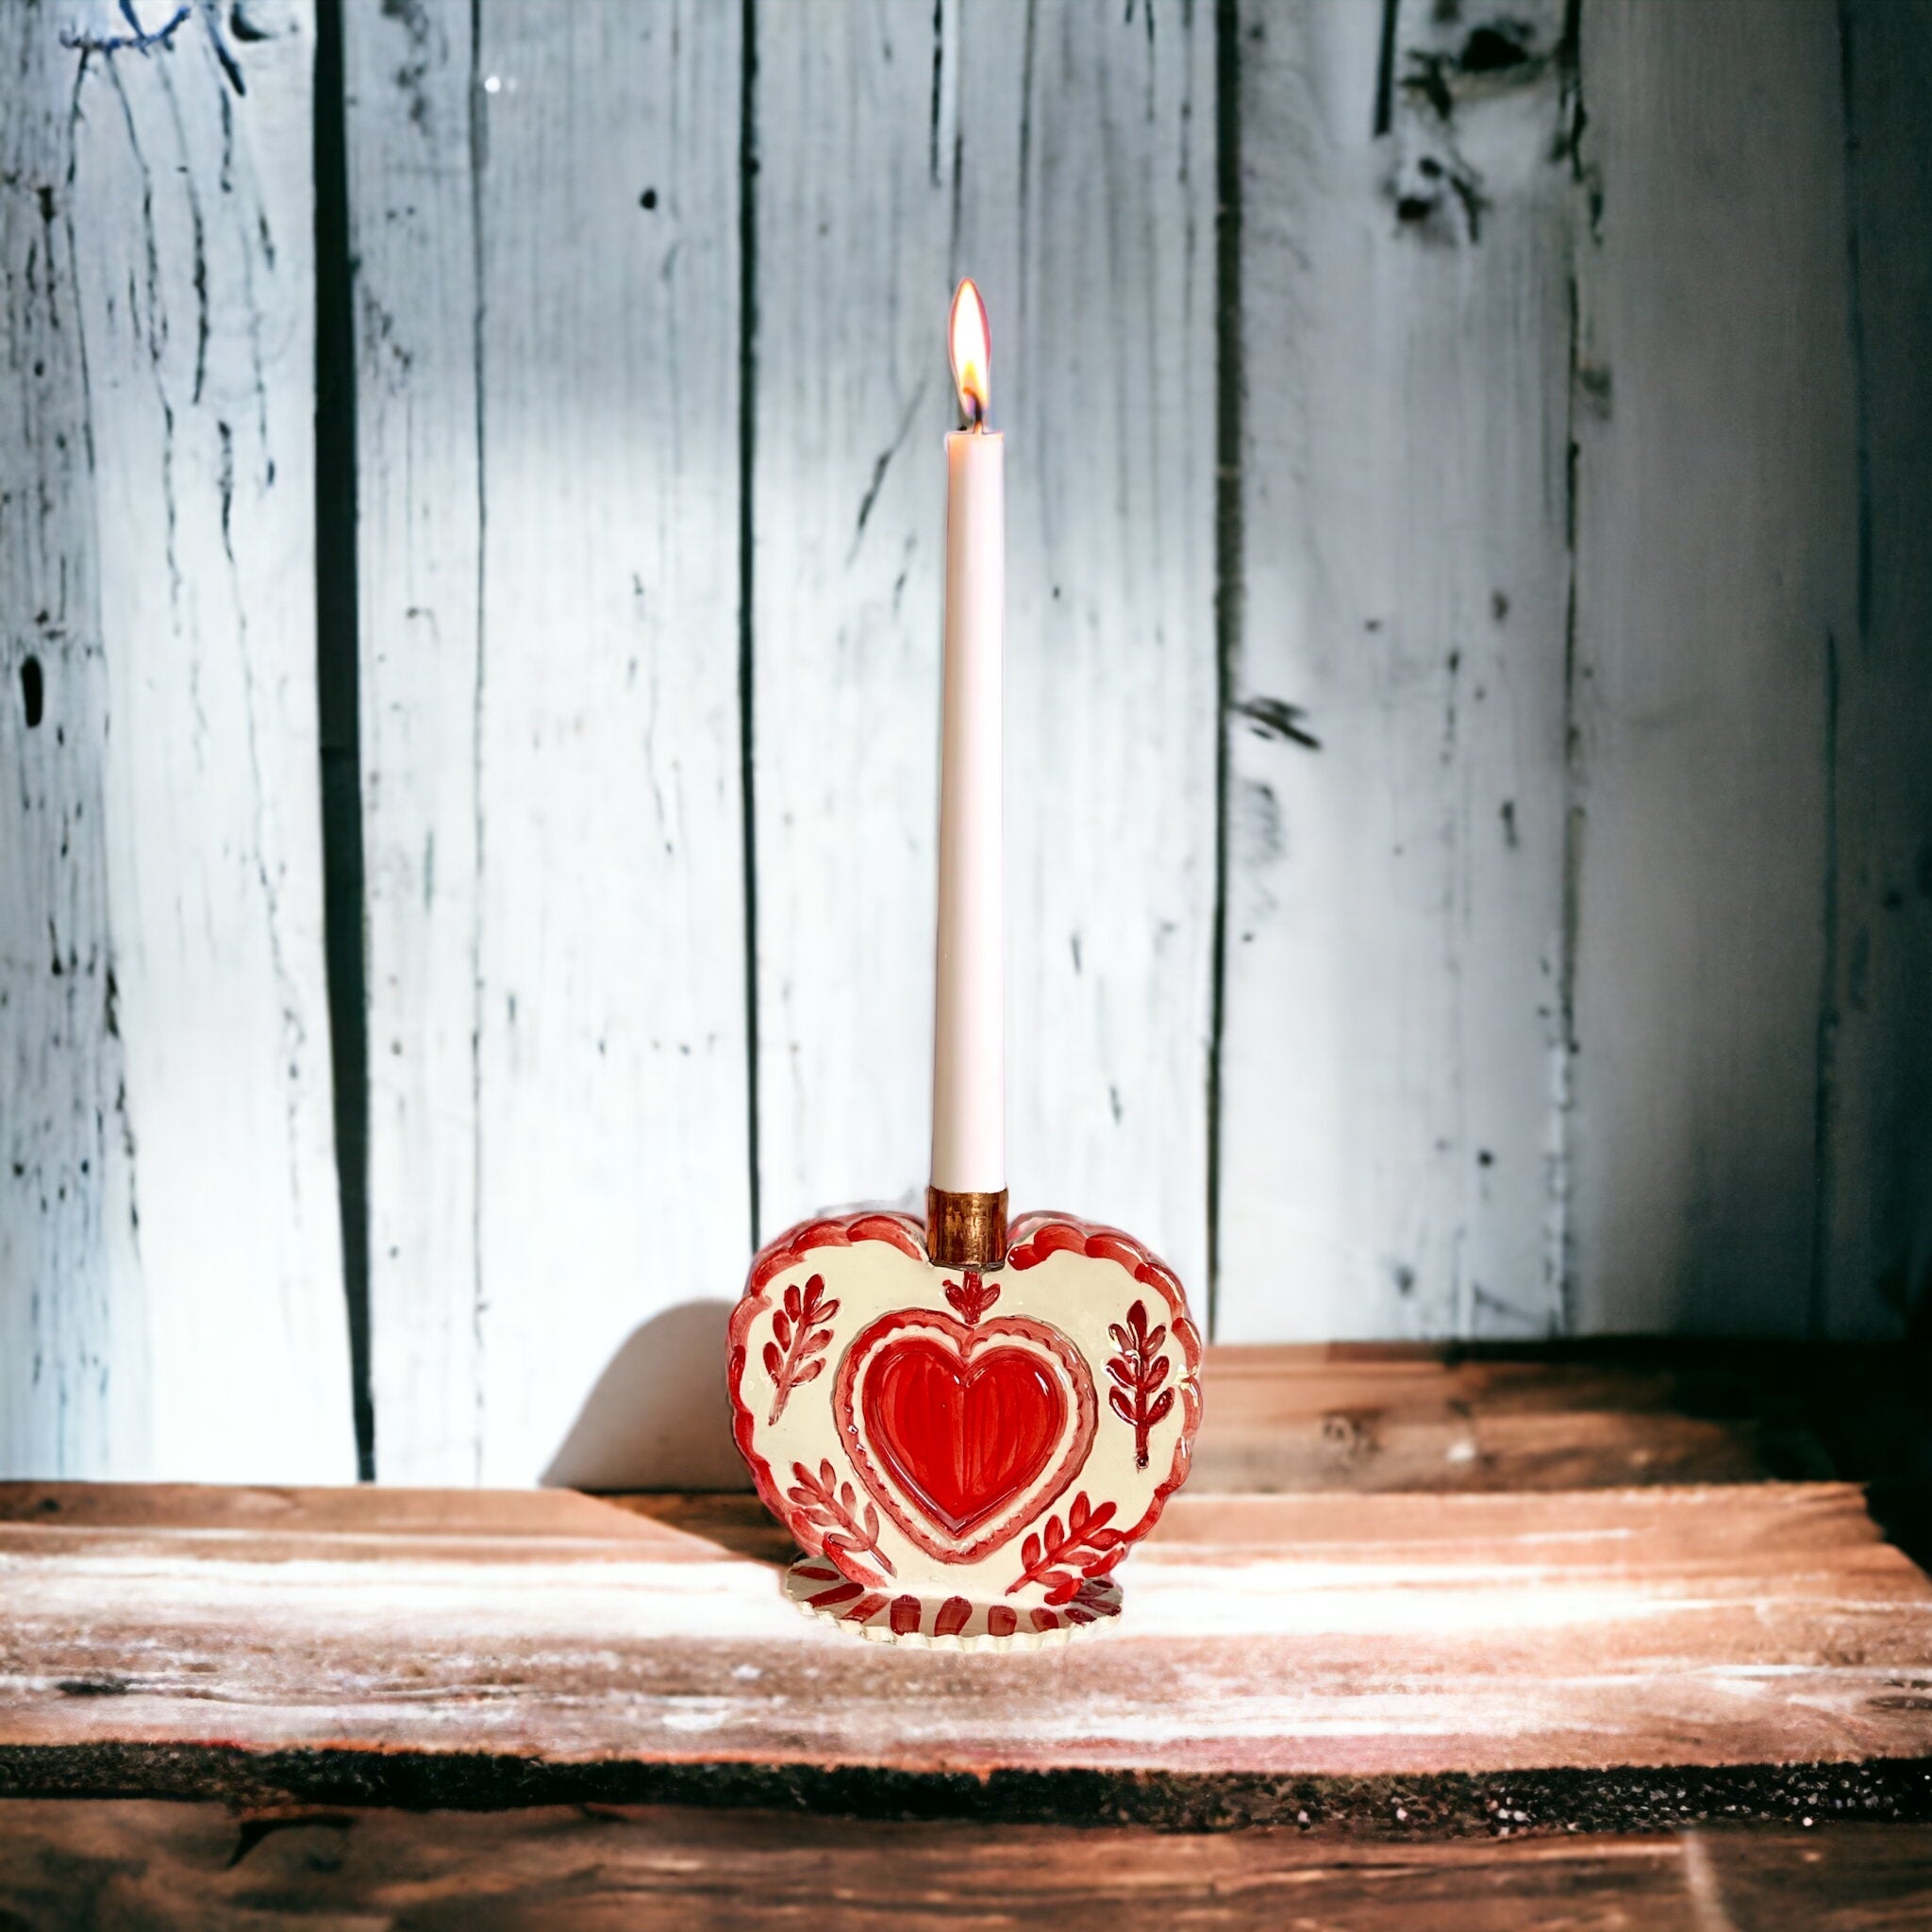 Heart Candlestick Holder - Premium Cake Topper from Tricia Lowenfield Design 